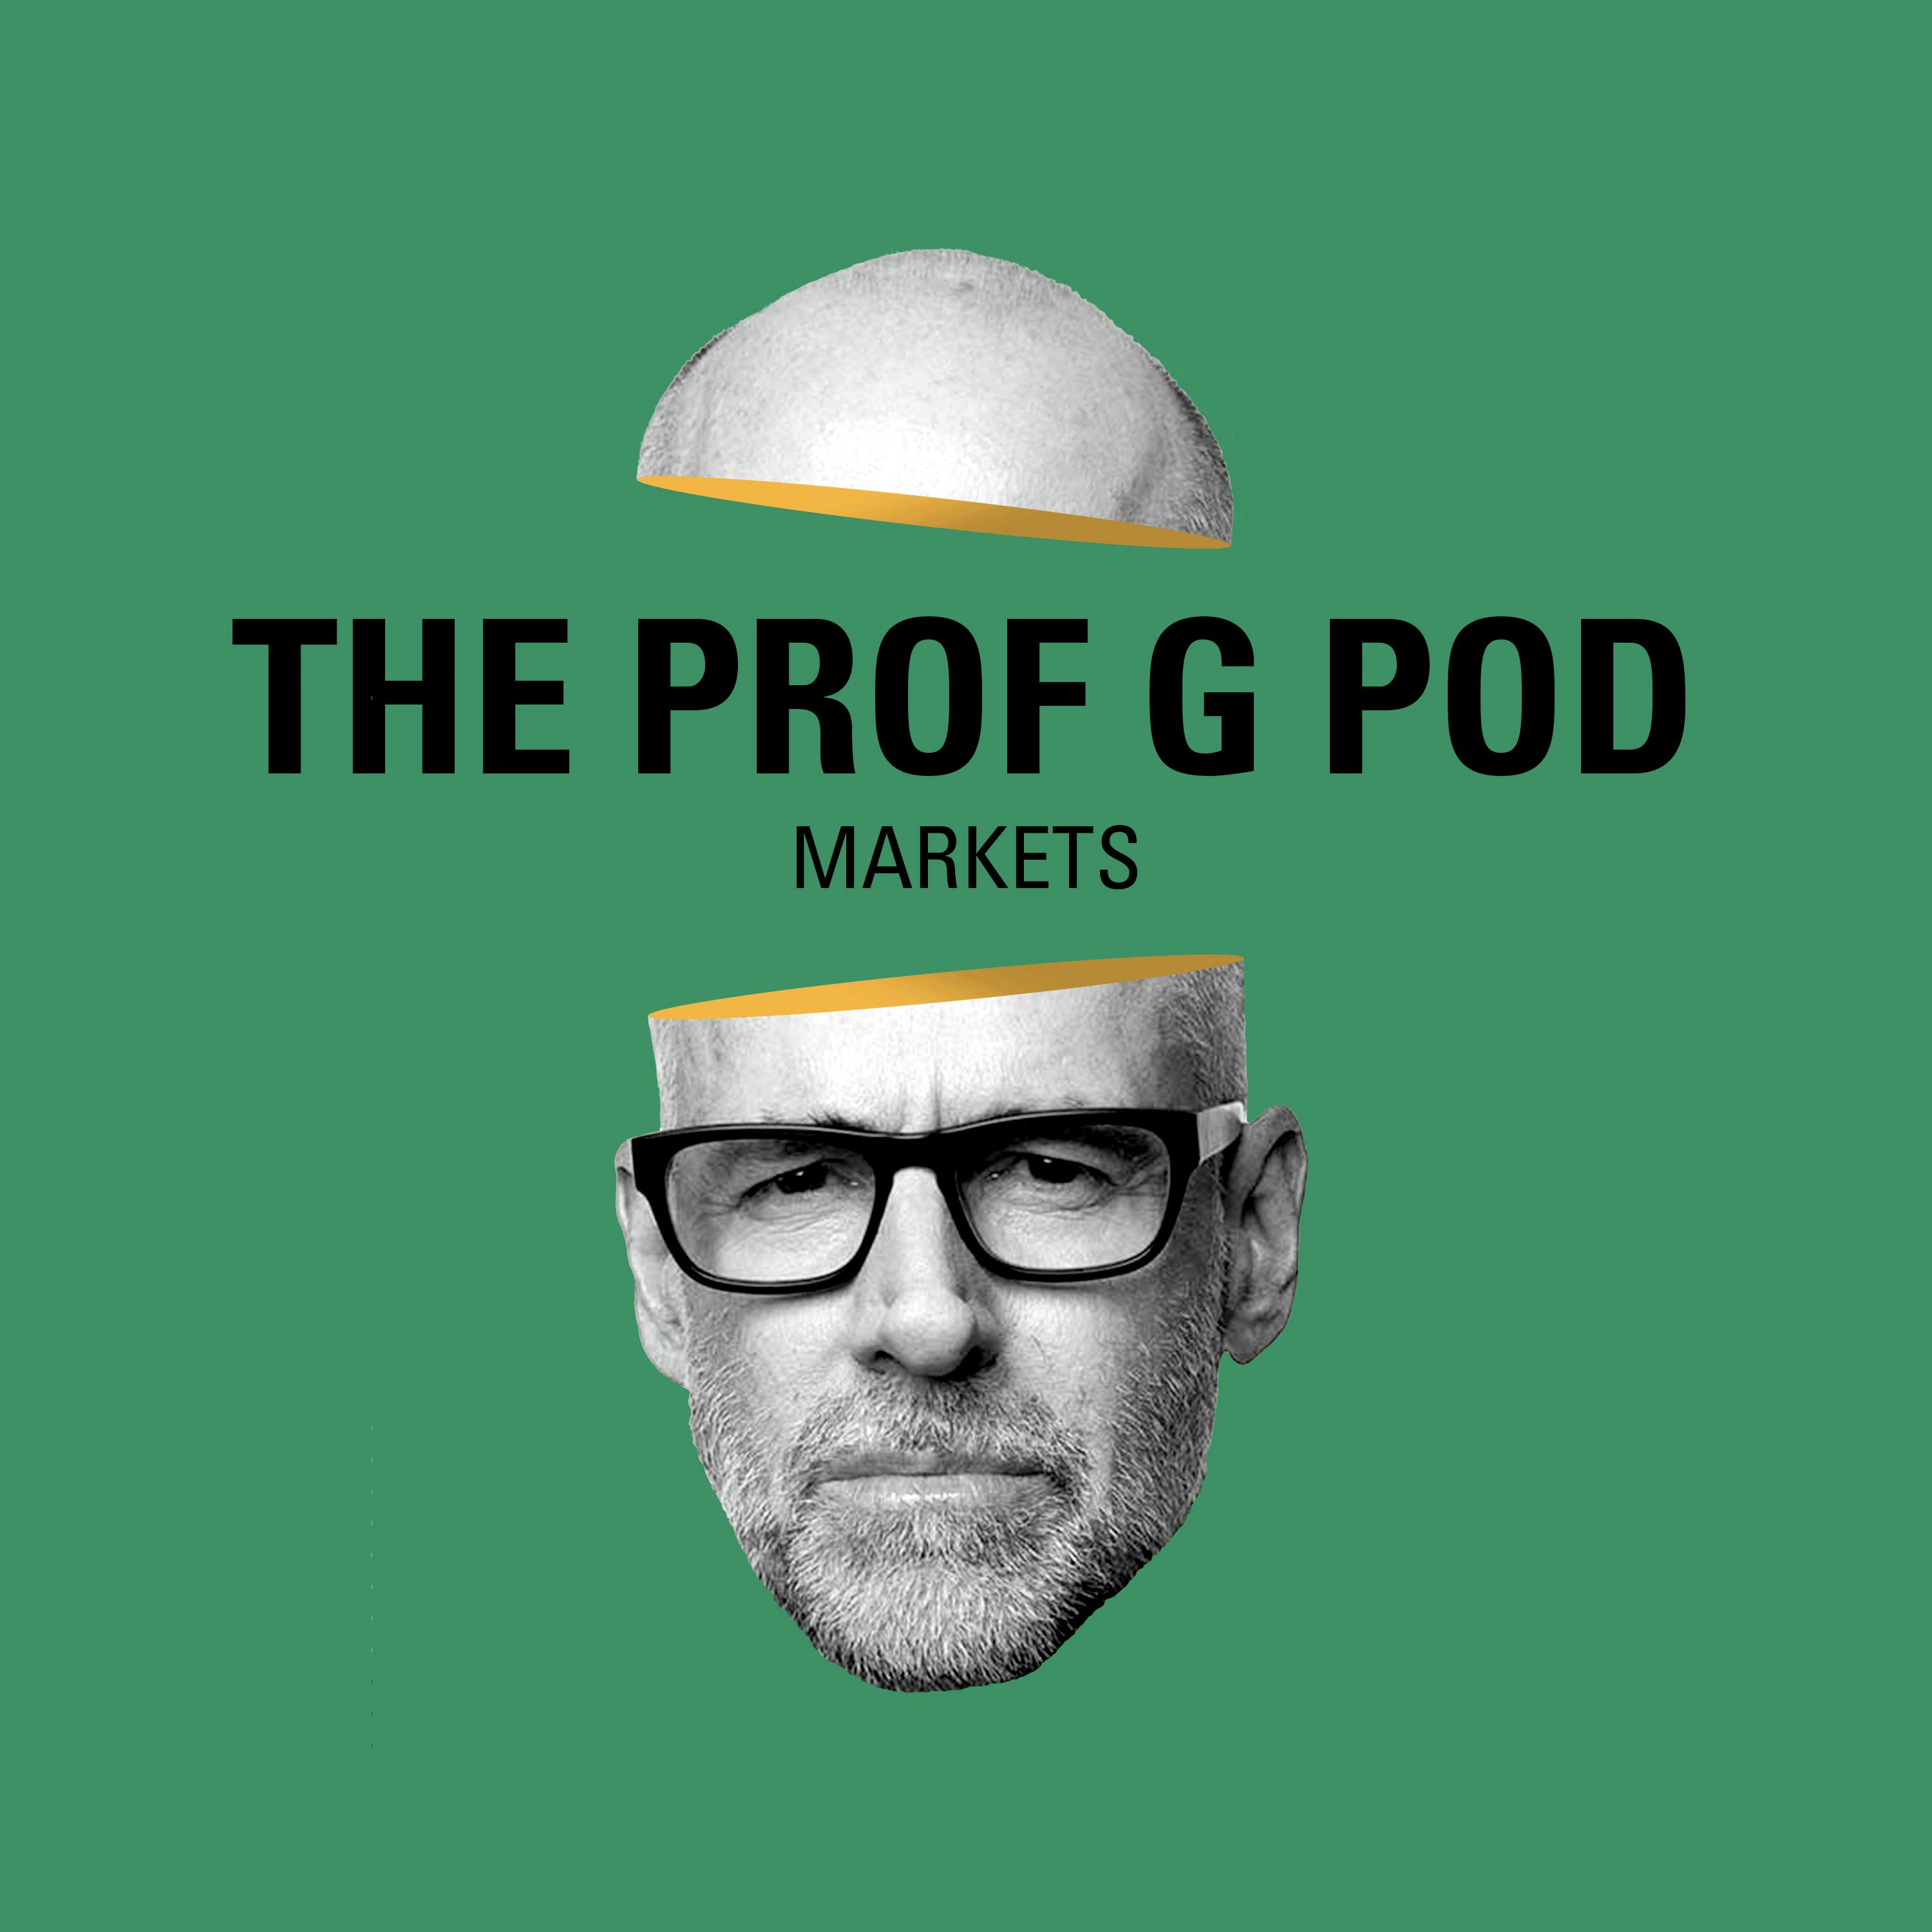 Prof G Markets: Arm’s IPO, Instacart’s Valuation, and Salesforce’s Year of Efficiency